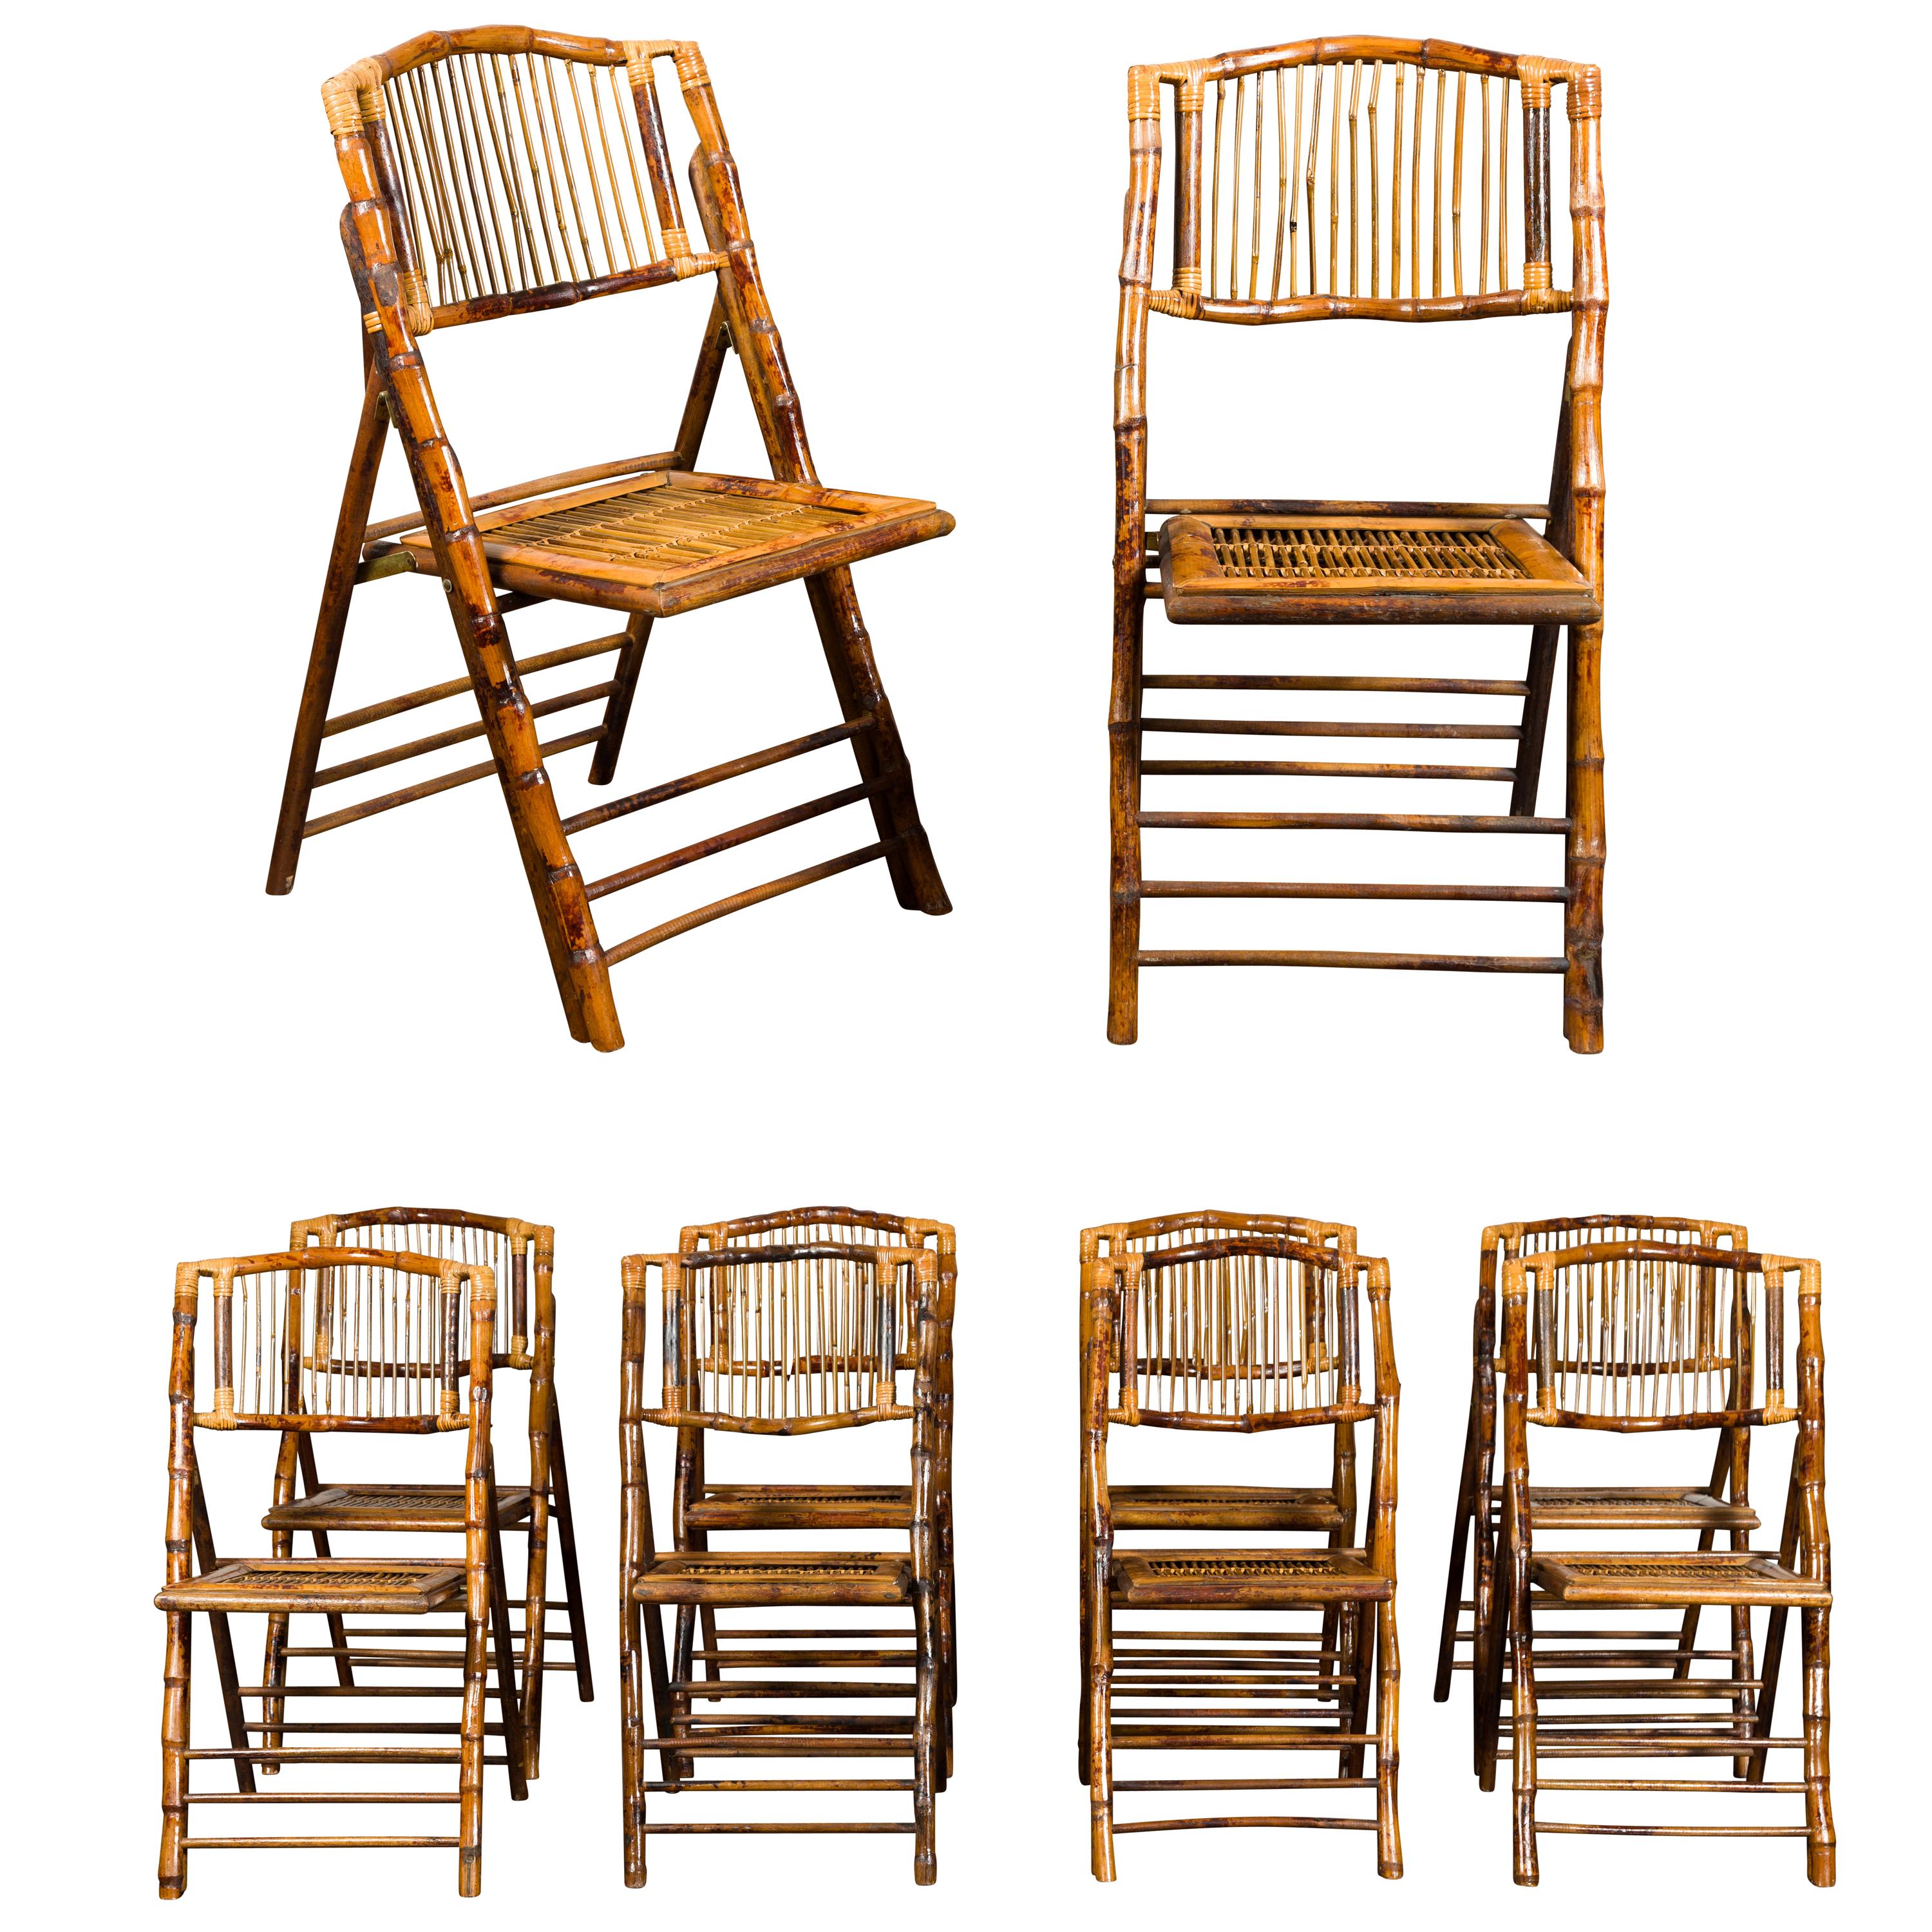 Set of Ten English Midcentury Bamboo Folding Side Chairs with Slatted Backs